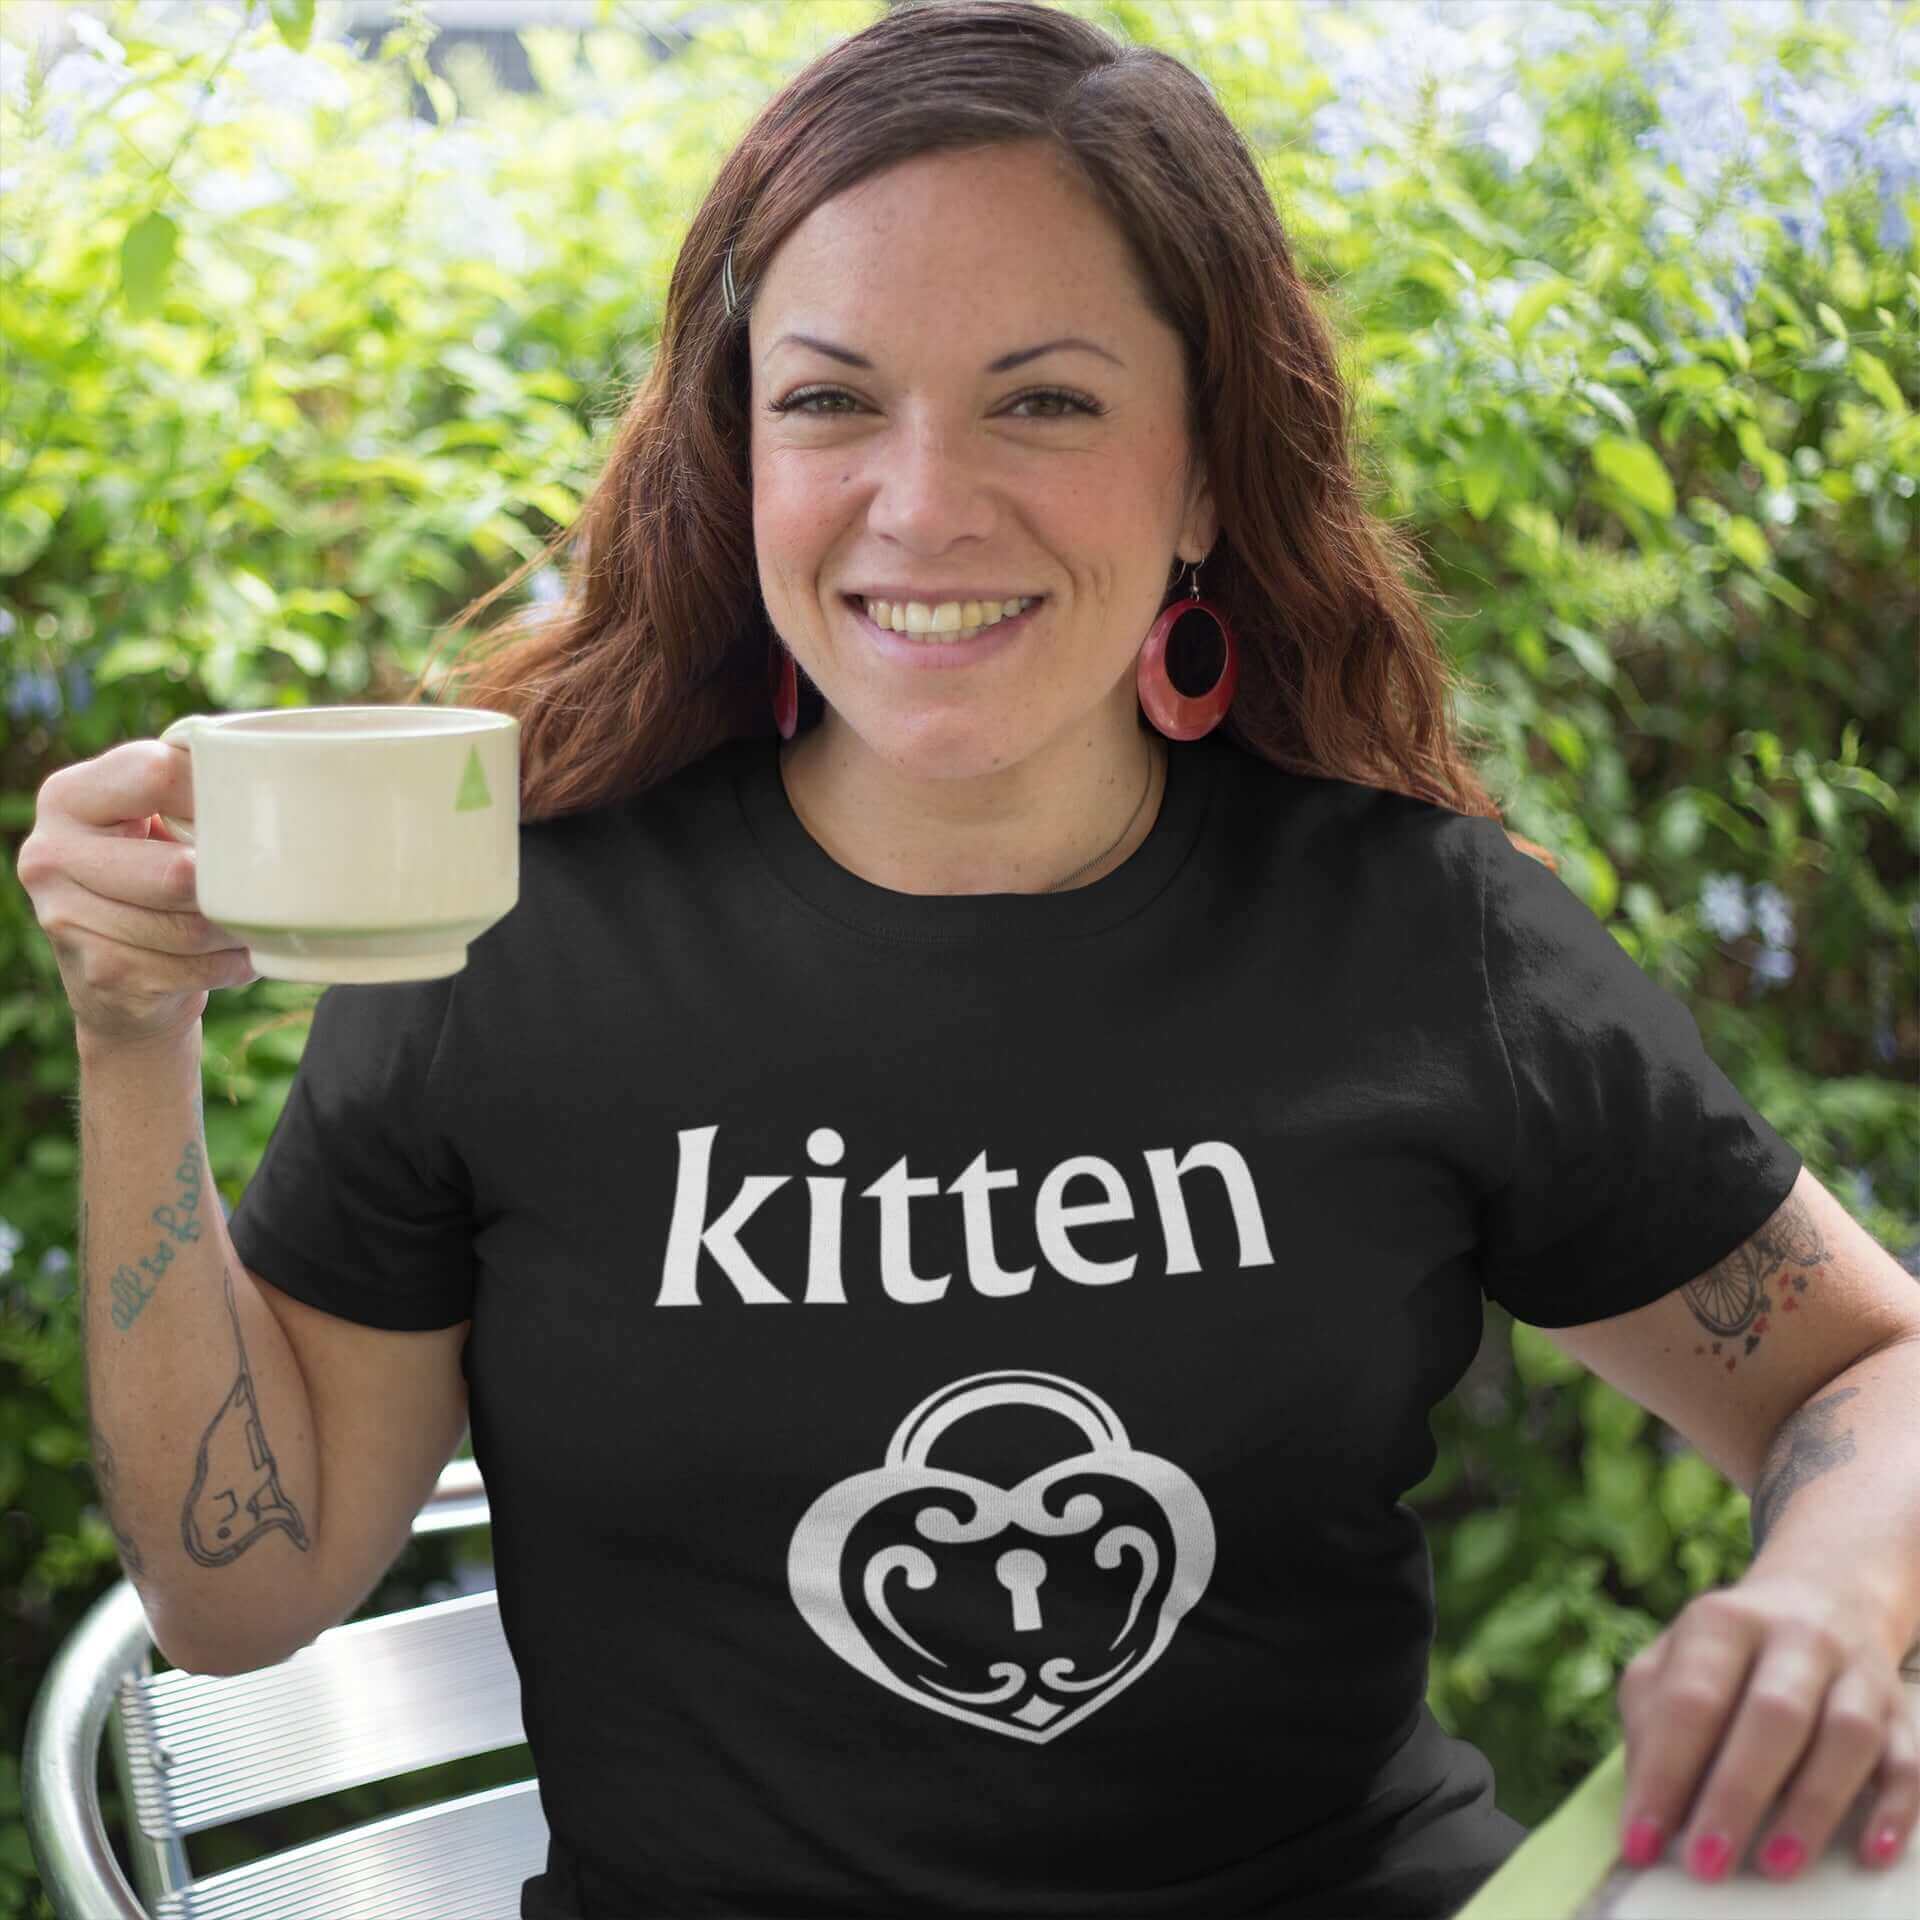 Woman wearing a black t-shirt with an image of a BDSM heart shaped lock and the word kitten printed on the front.